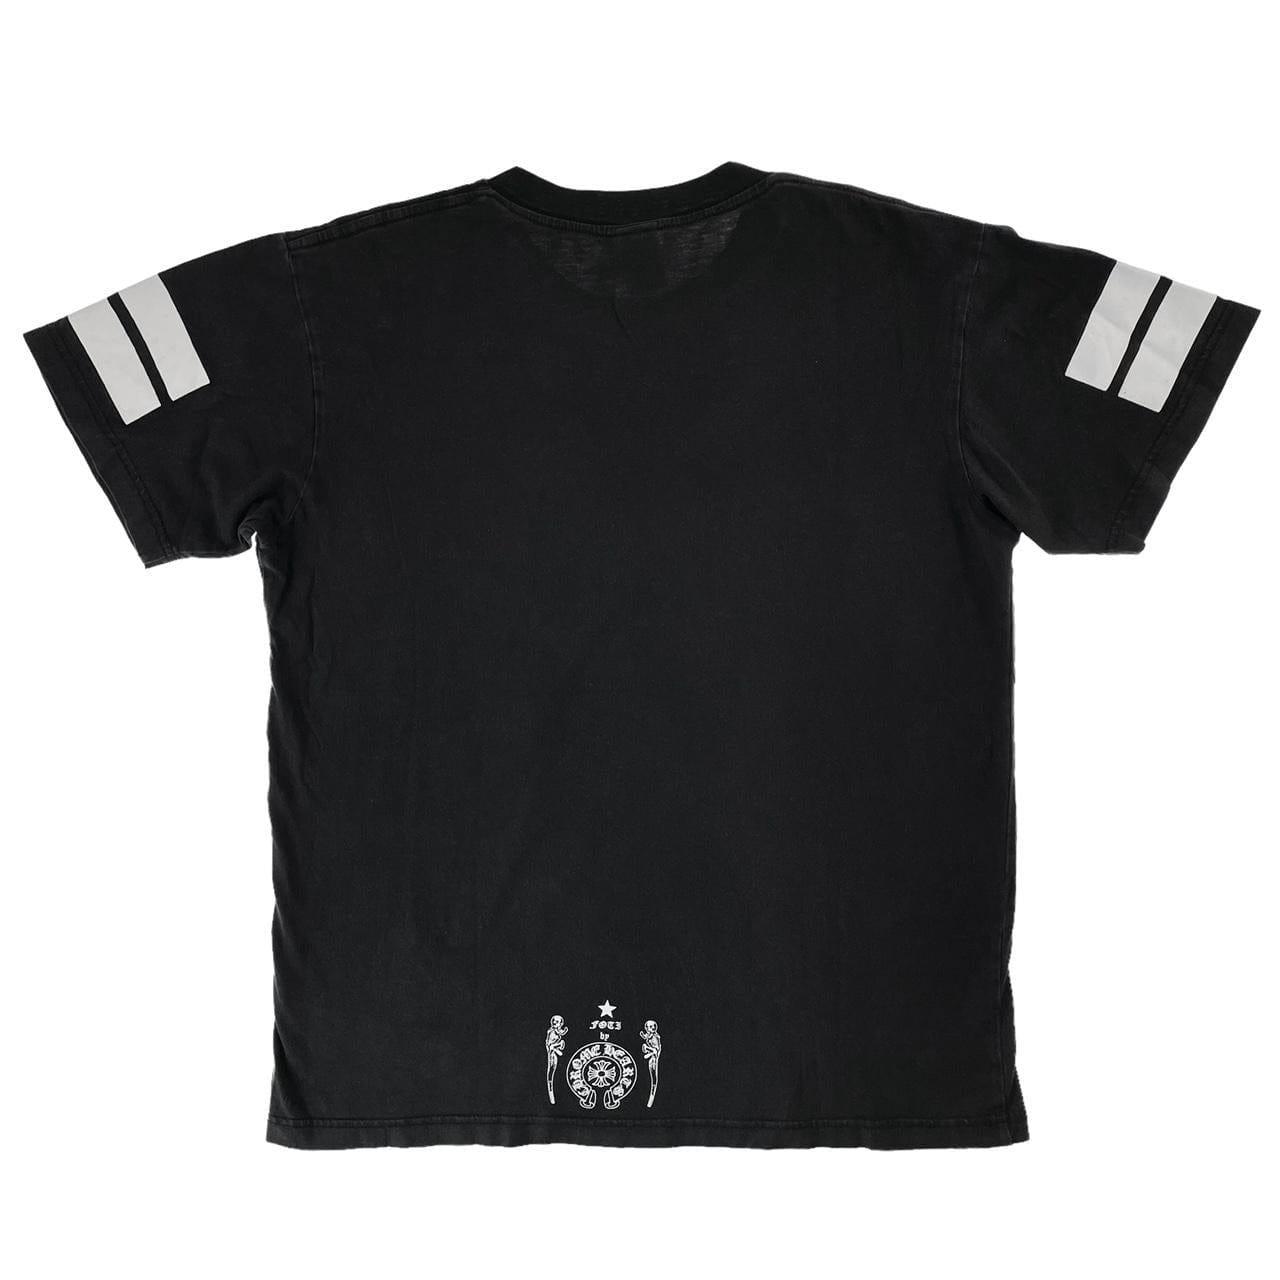 Chrome Hearts t shirt size M - Known Source